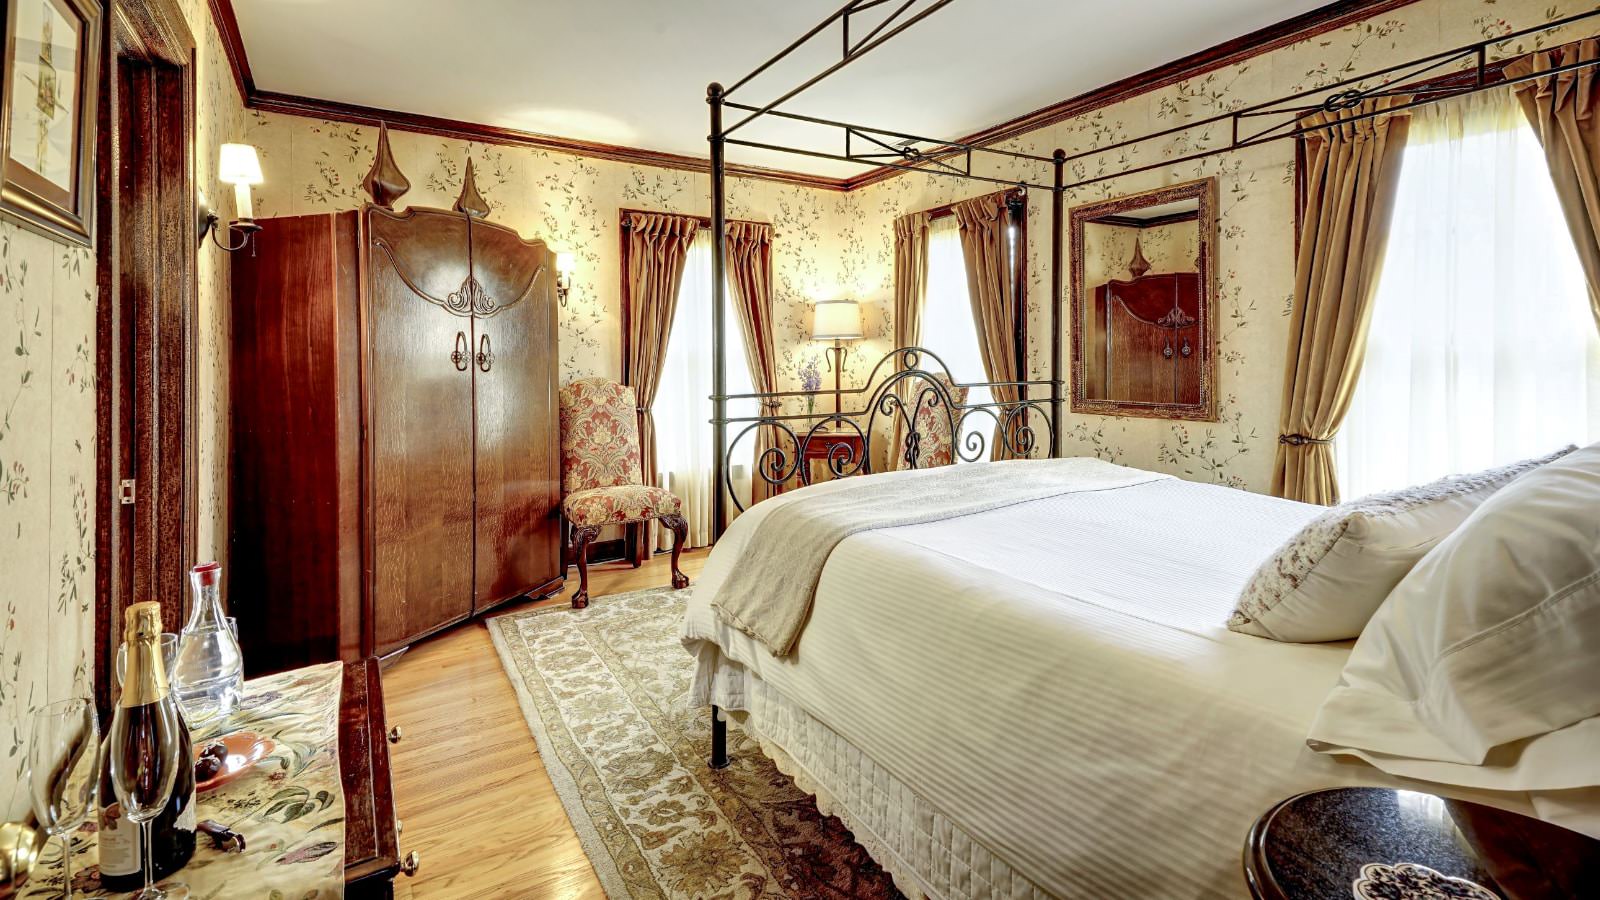 Bedroom with light colored wallpaper, hardwood flooring, area rugs, wrought iron four poster bed with white linens, large wooden armoire, and sitting area